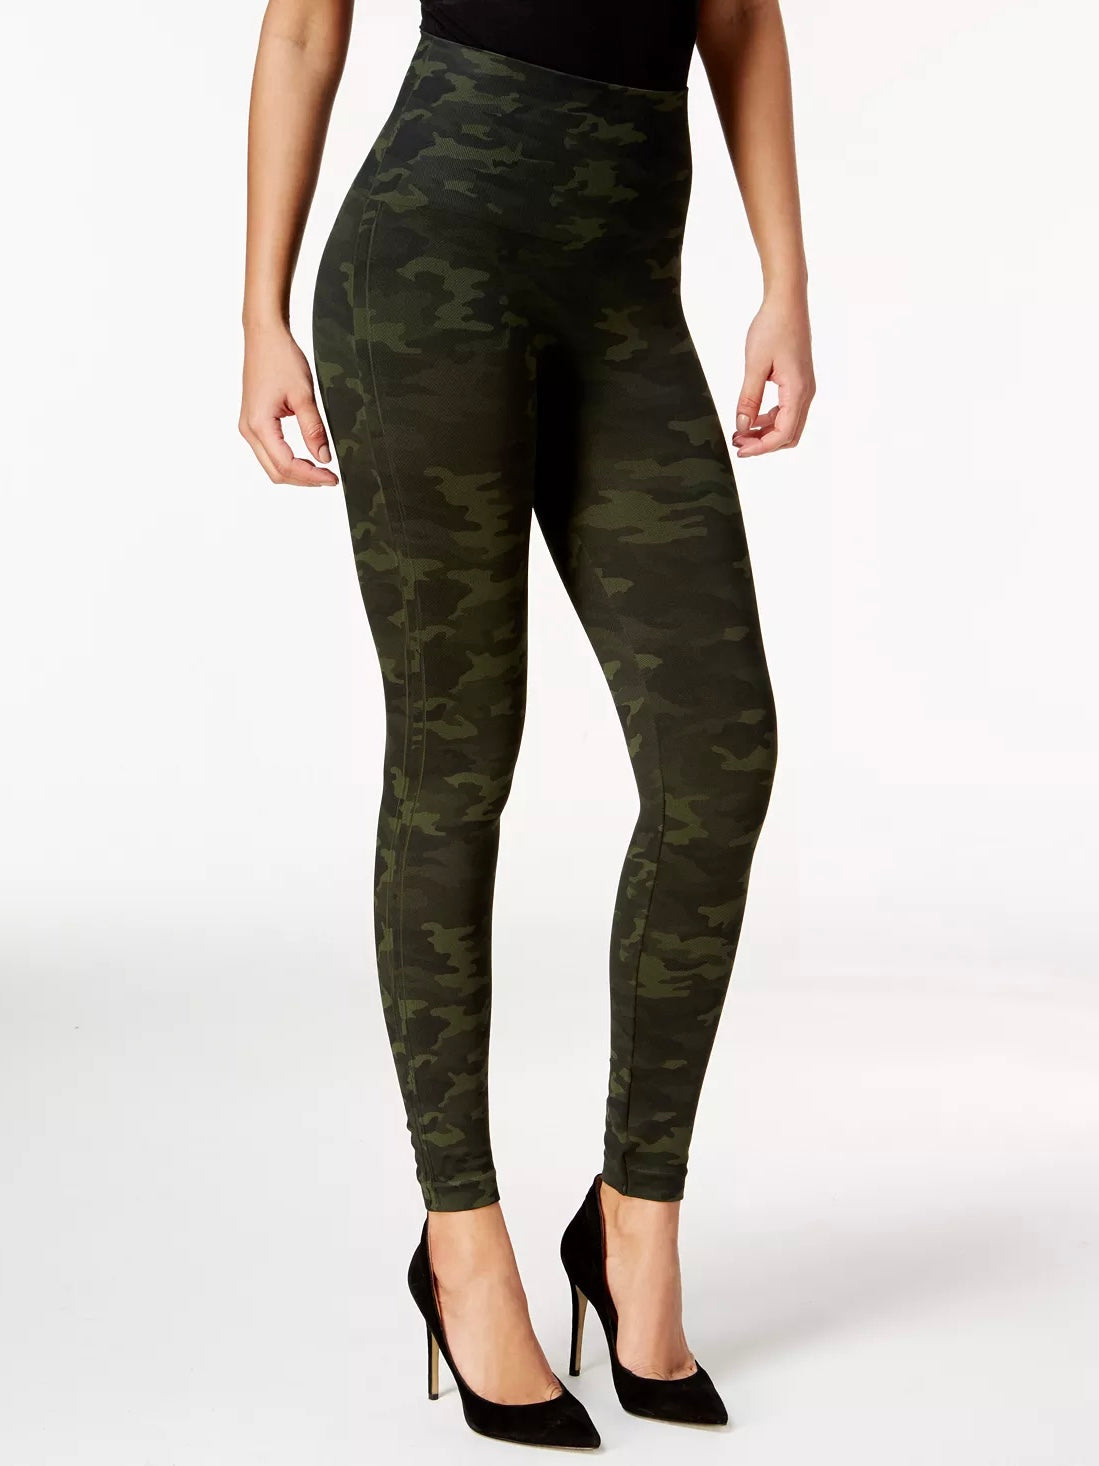 Spanx Seamless Look At Me Now Leggings- Green Camo